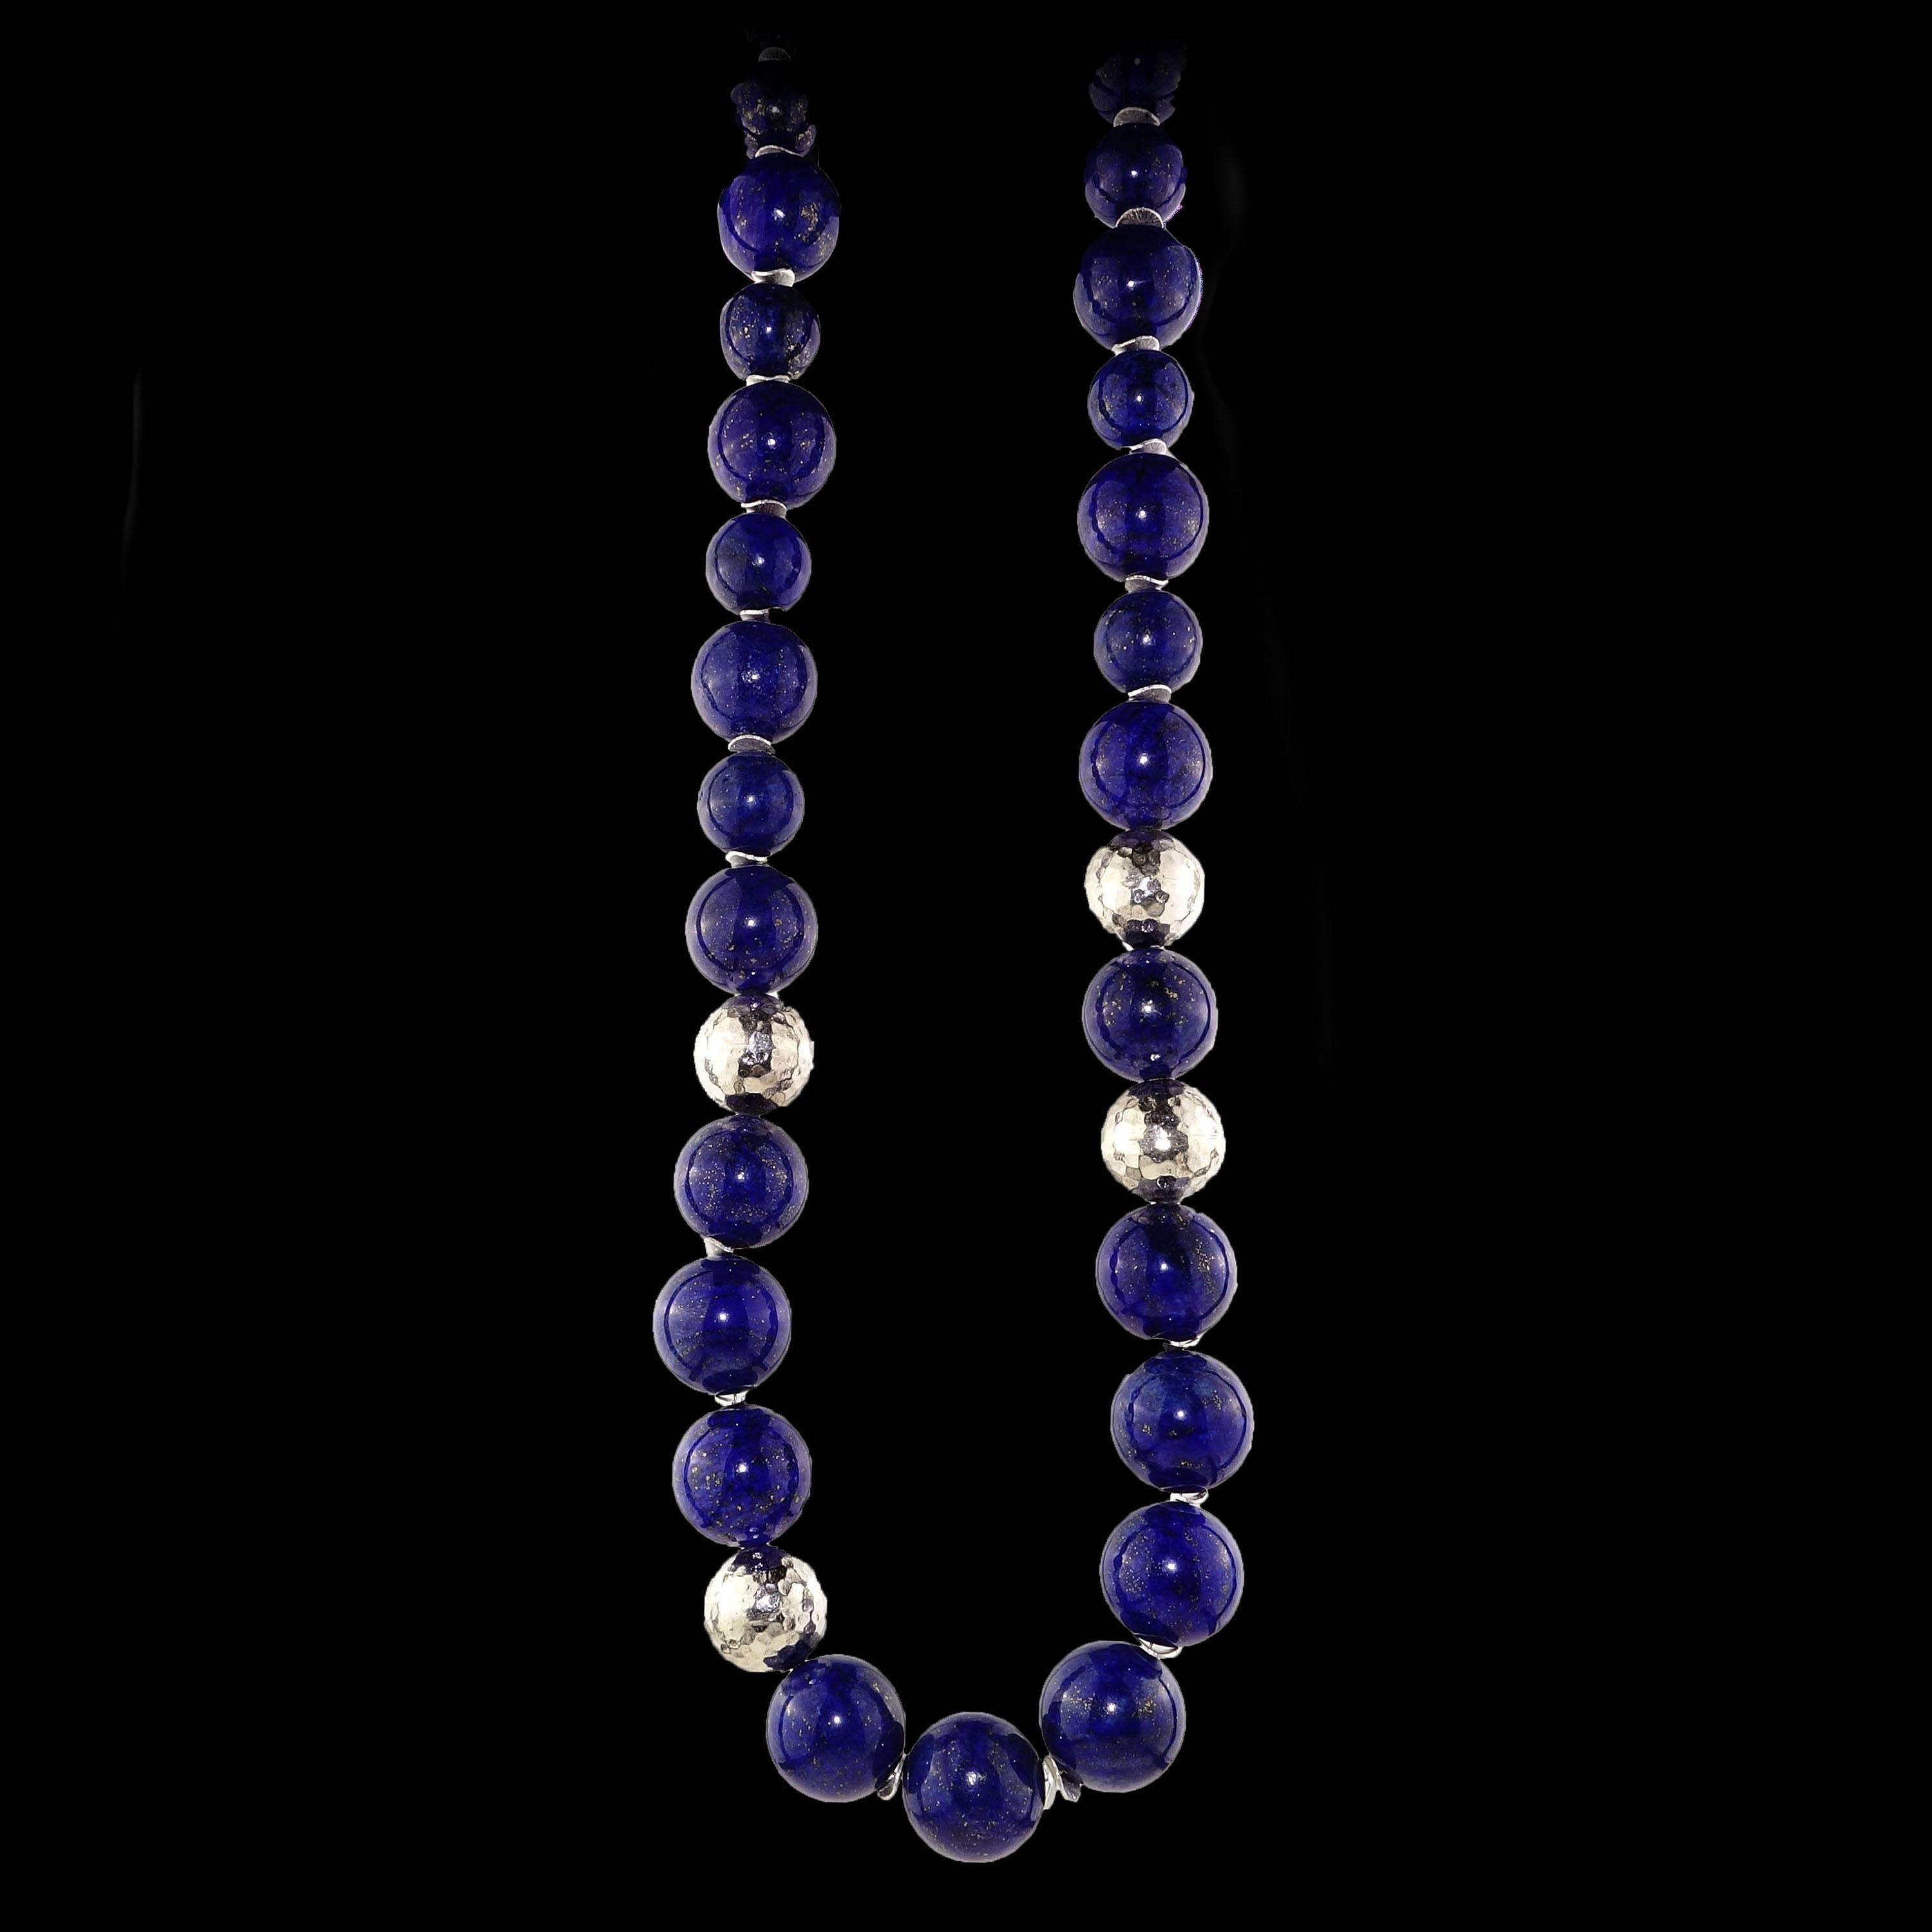 Artisan Gemjunky Statement Lapis Lazuli Necklace with Pure Silver Accents